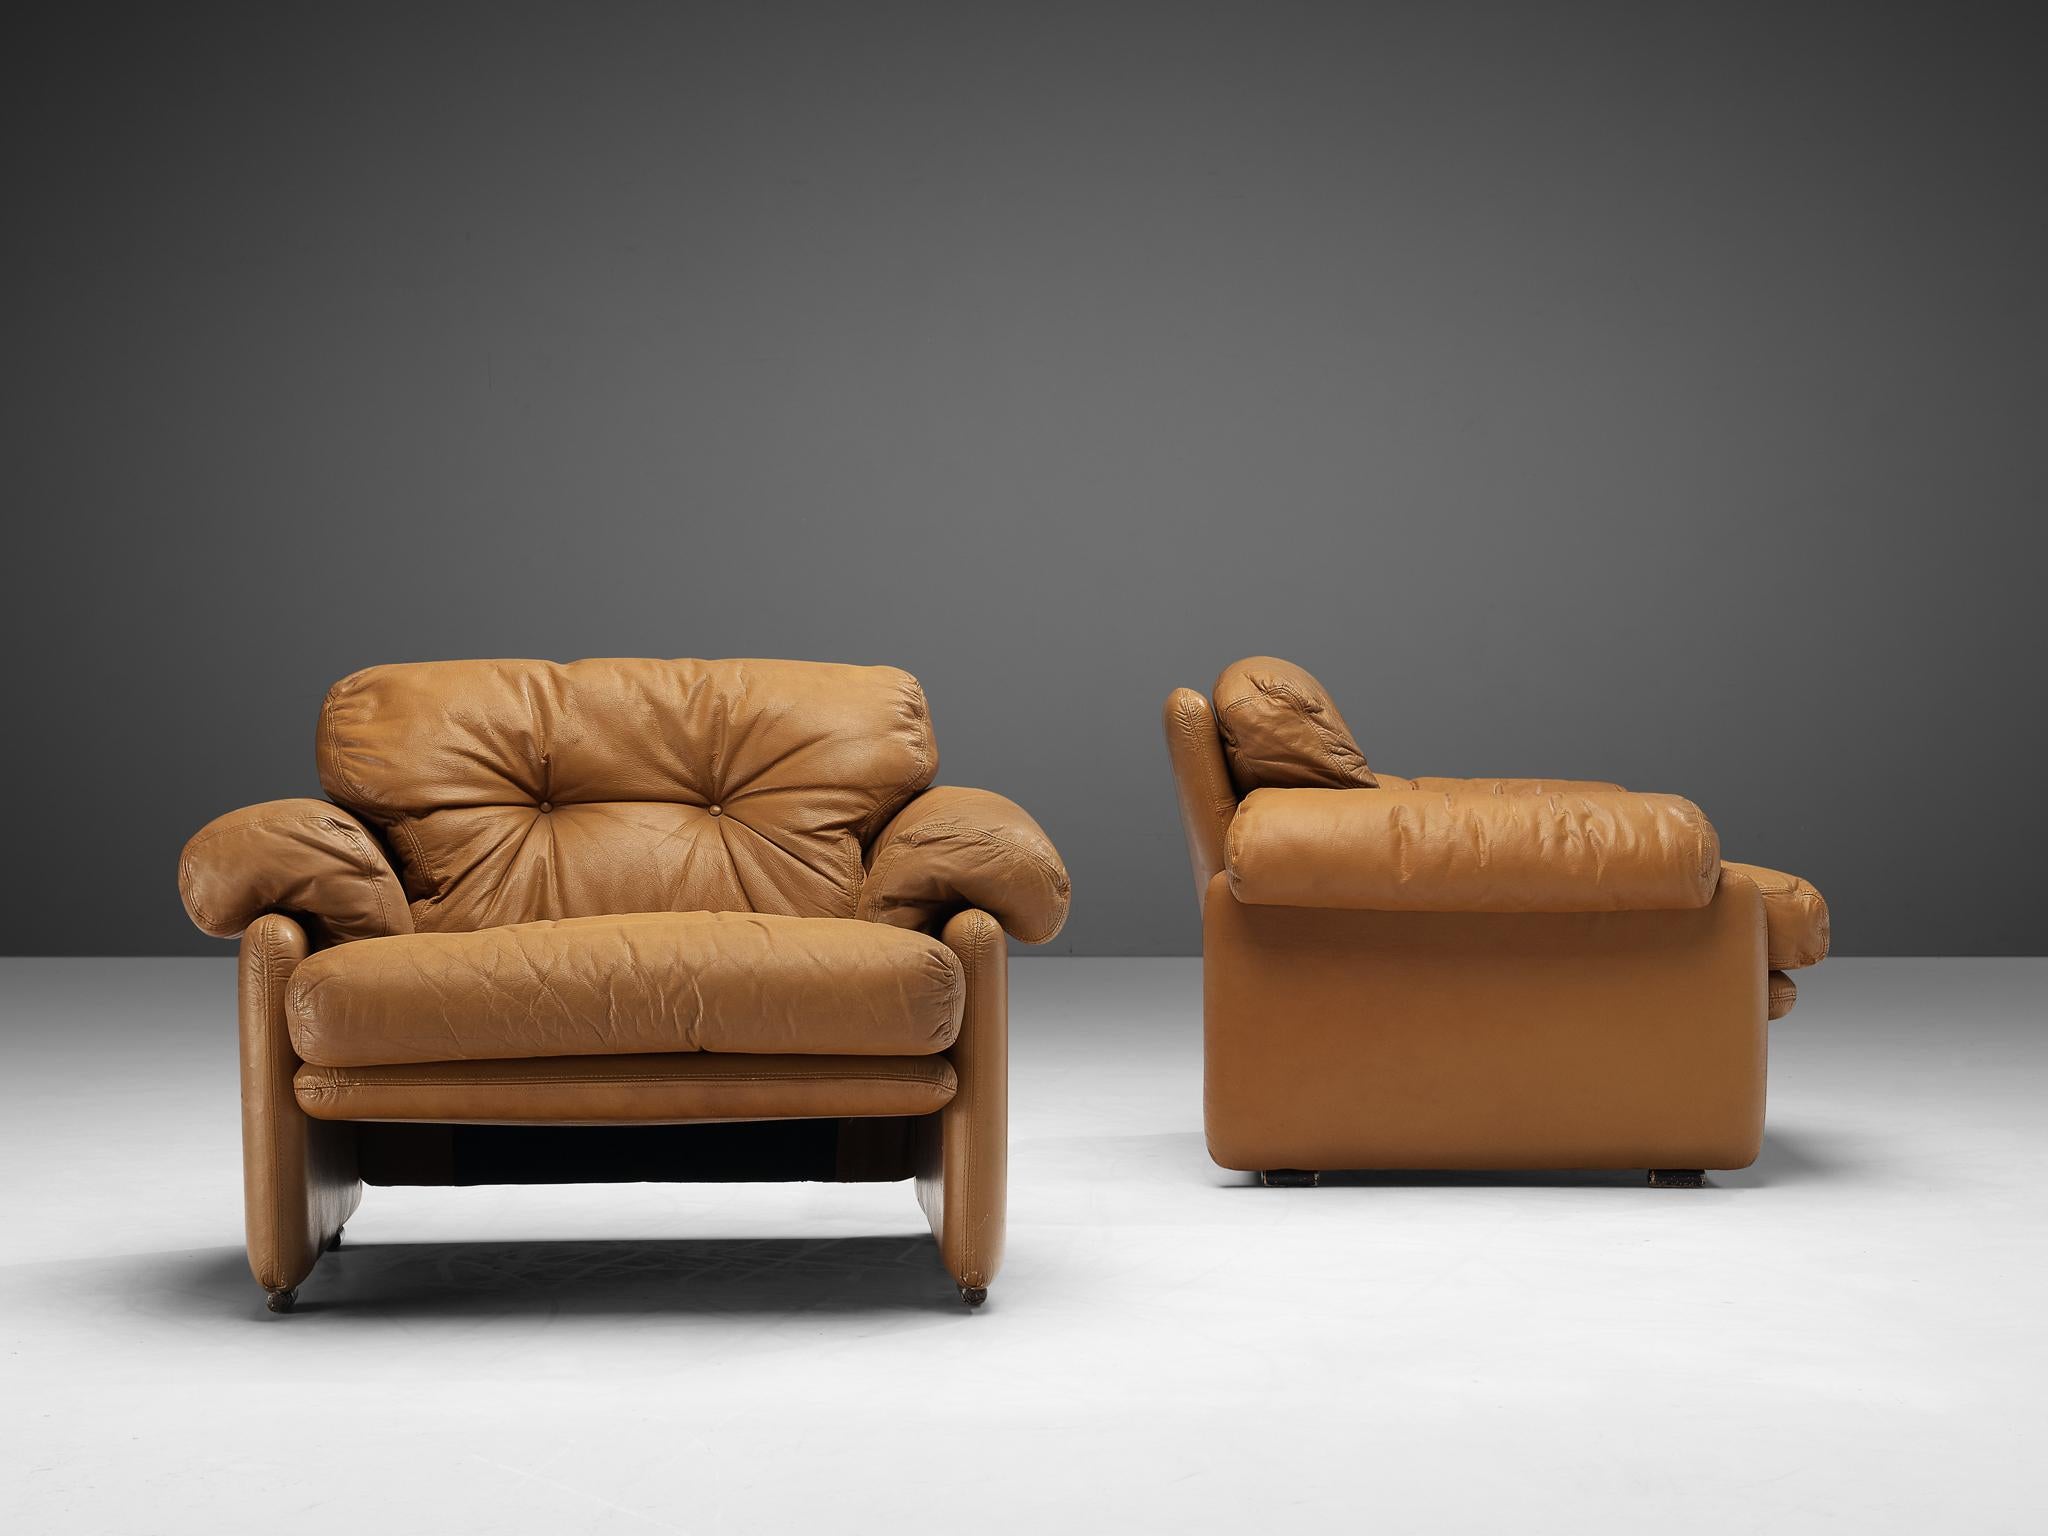 Afra & Tobia Scarpa Pair of 'Coronado' Lounge Chairs in Cognac Leather  For Sale 2